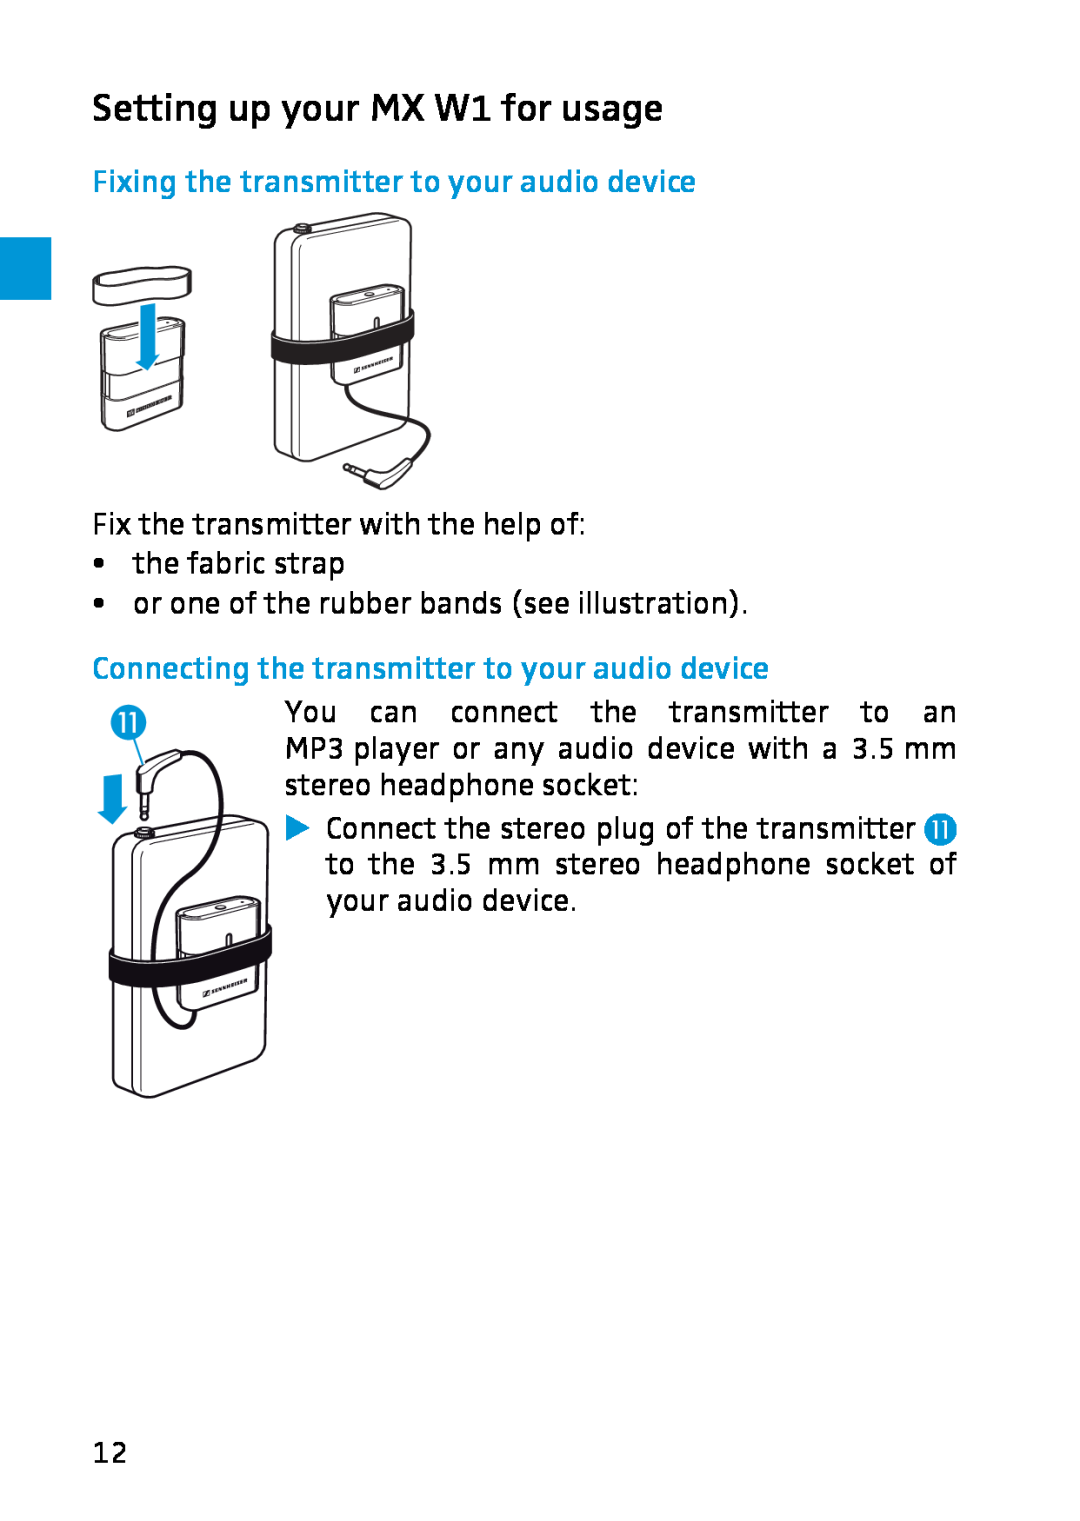 Sennheiser instruction manual Setting up your MX W1 for usage, Fixing the transmitter to your audio device 